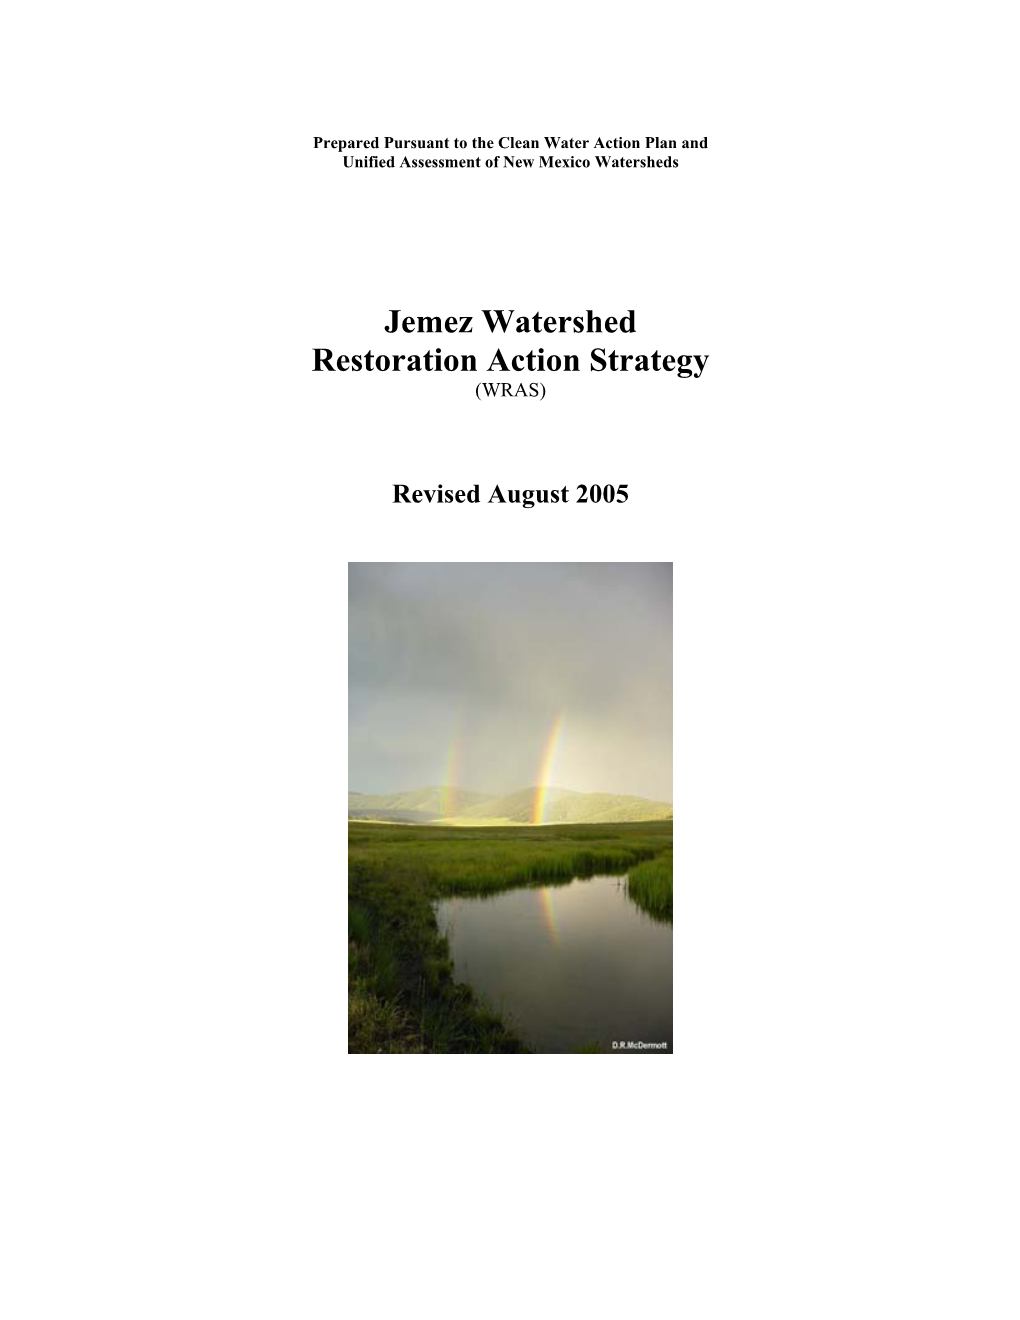 Jemez Watershed Restoration Action Strategy (WRAS)